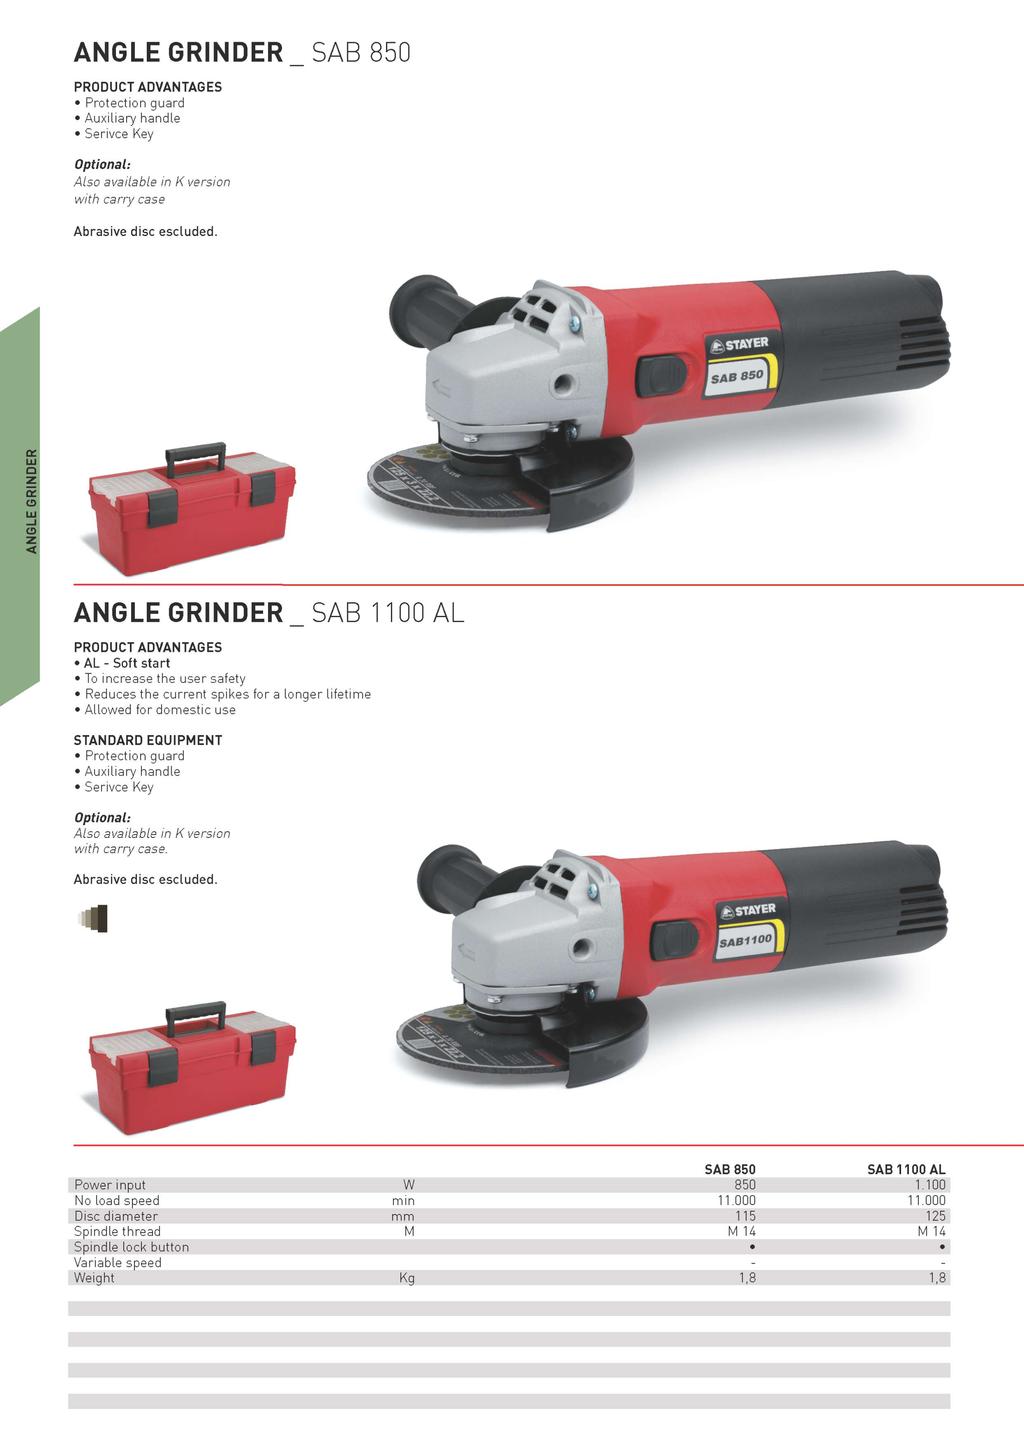 ANGLE GRINDER _ SAB 850 with carry case a.